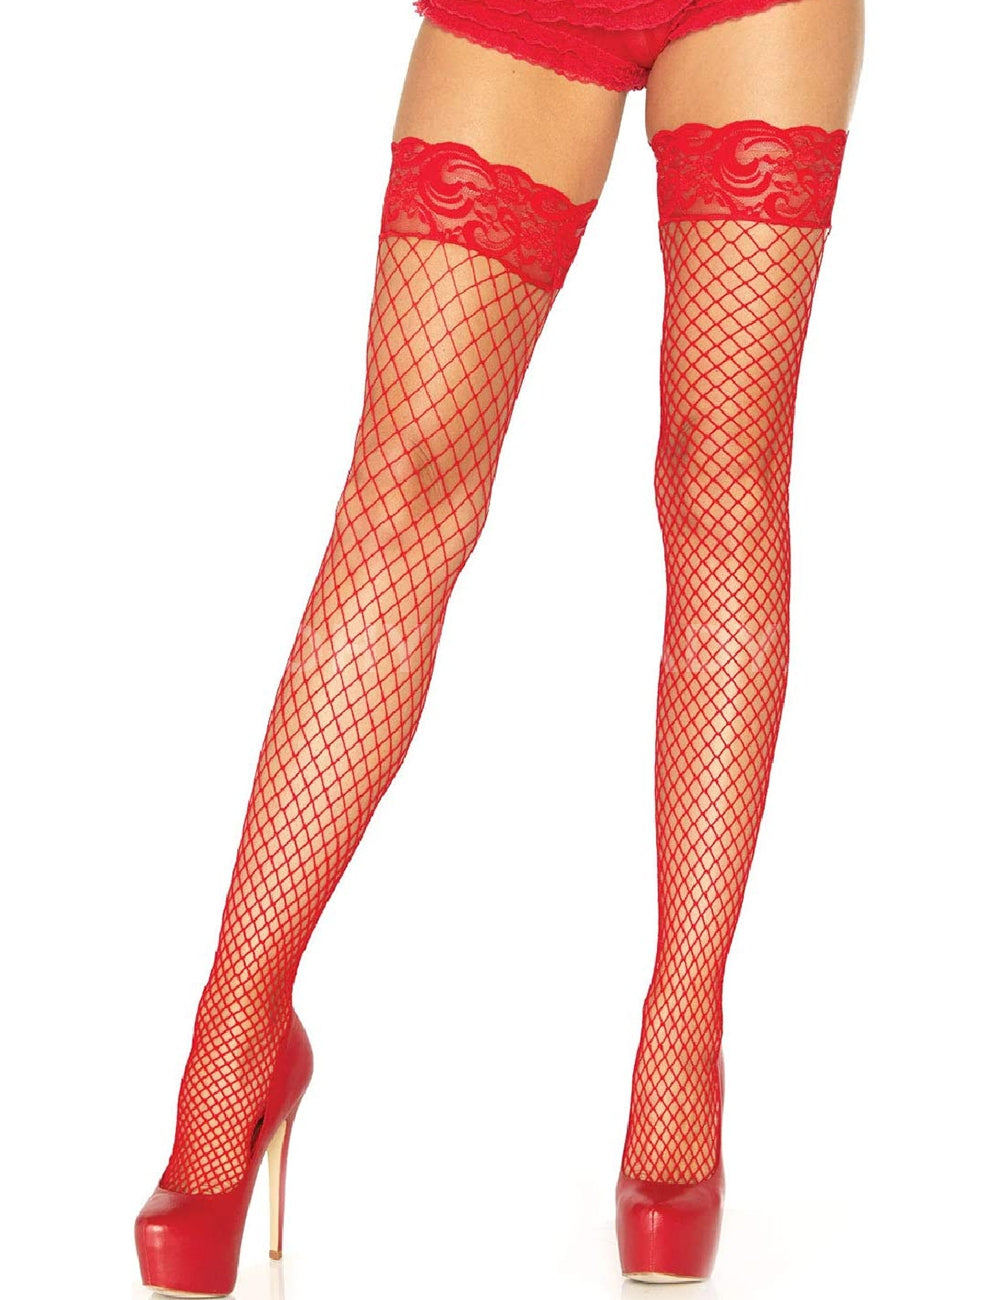 Ohyeah Plus Size Lace Top Sheer Thigh High red Stockings